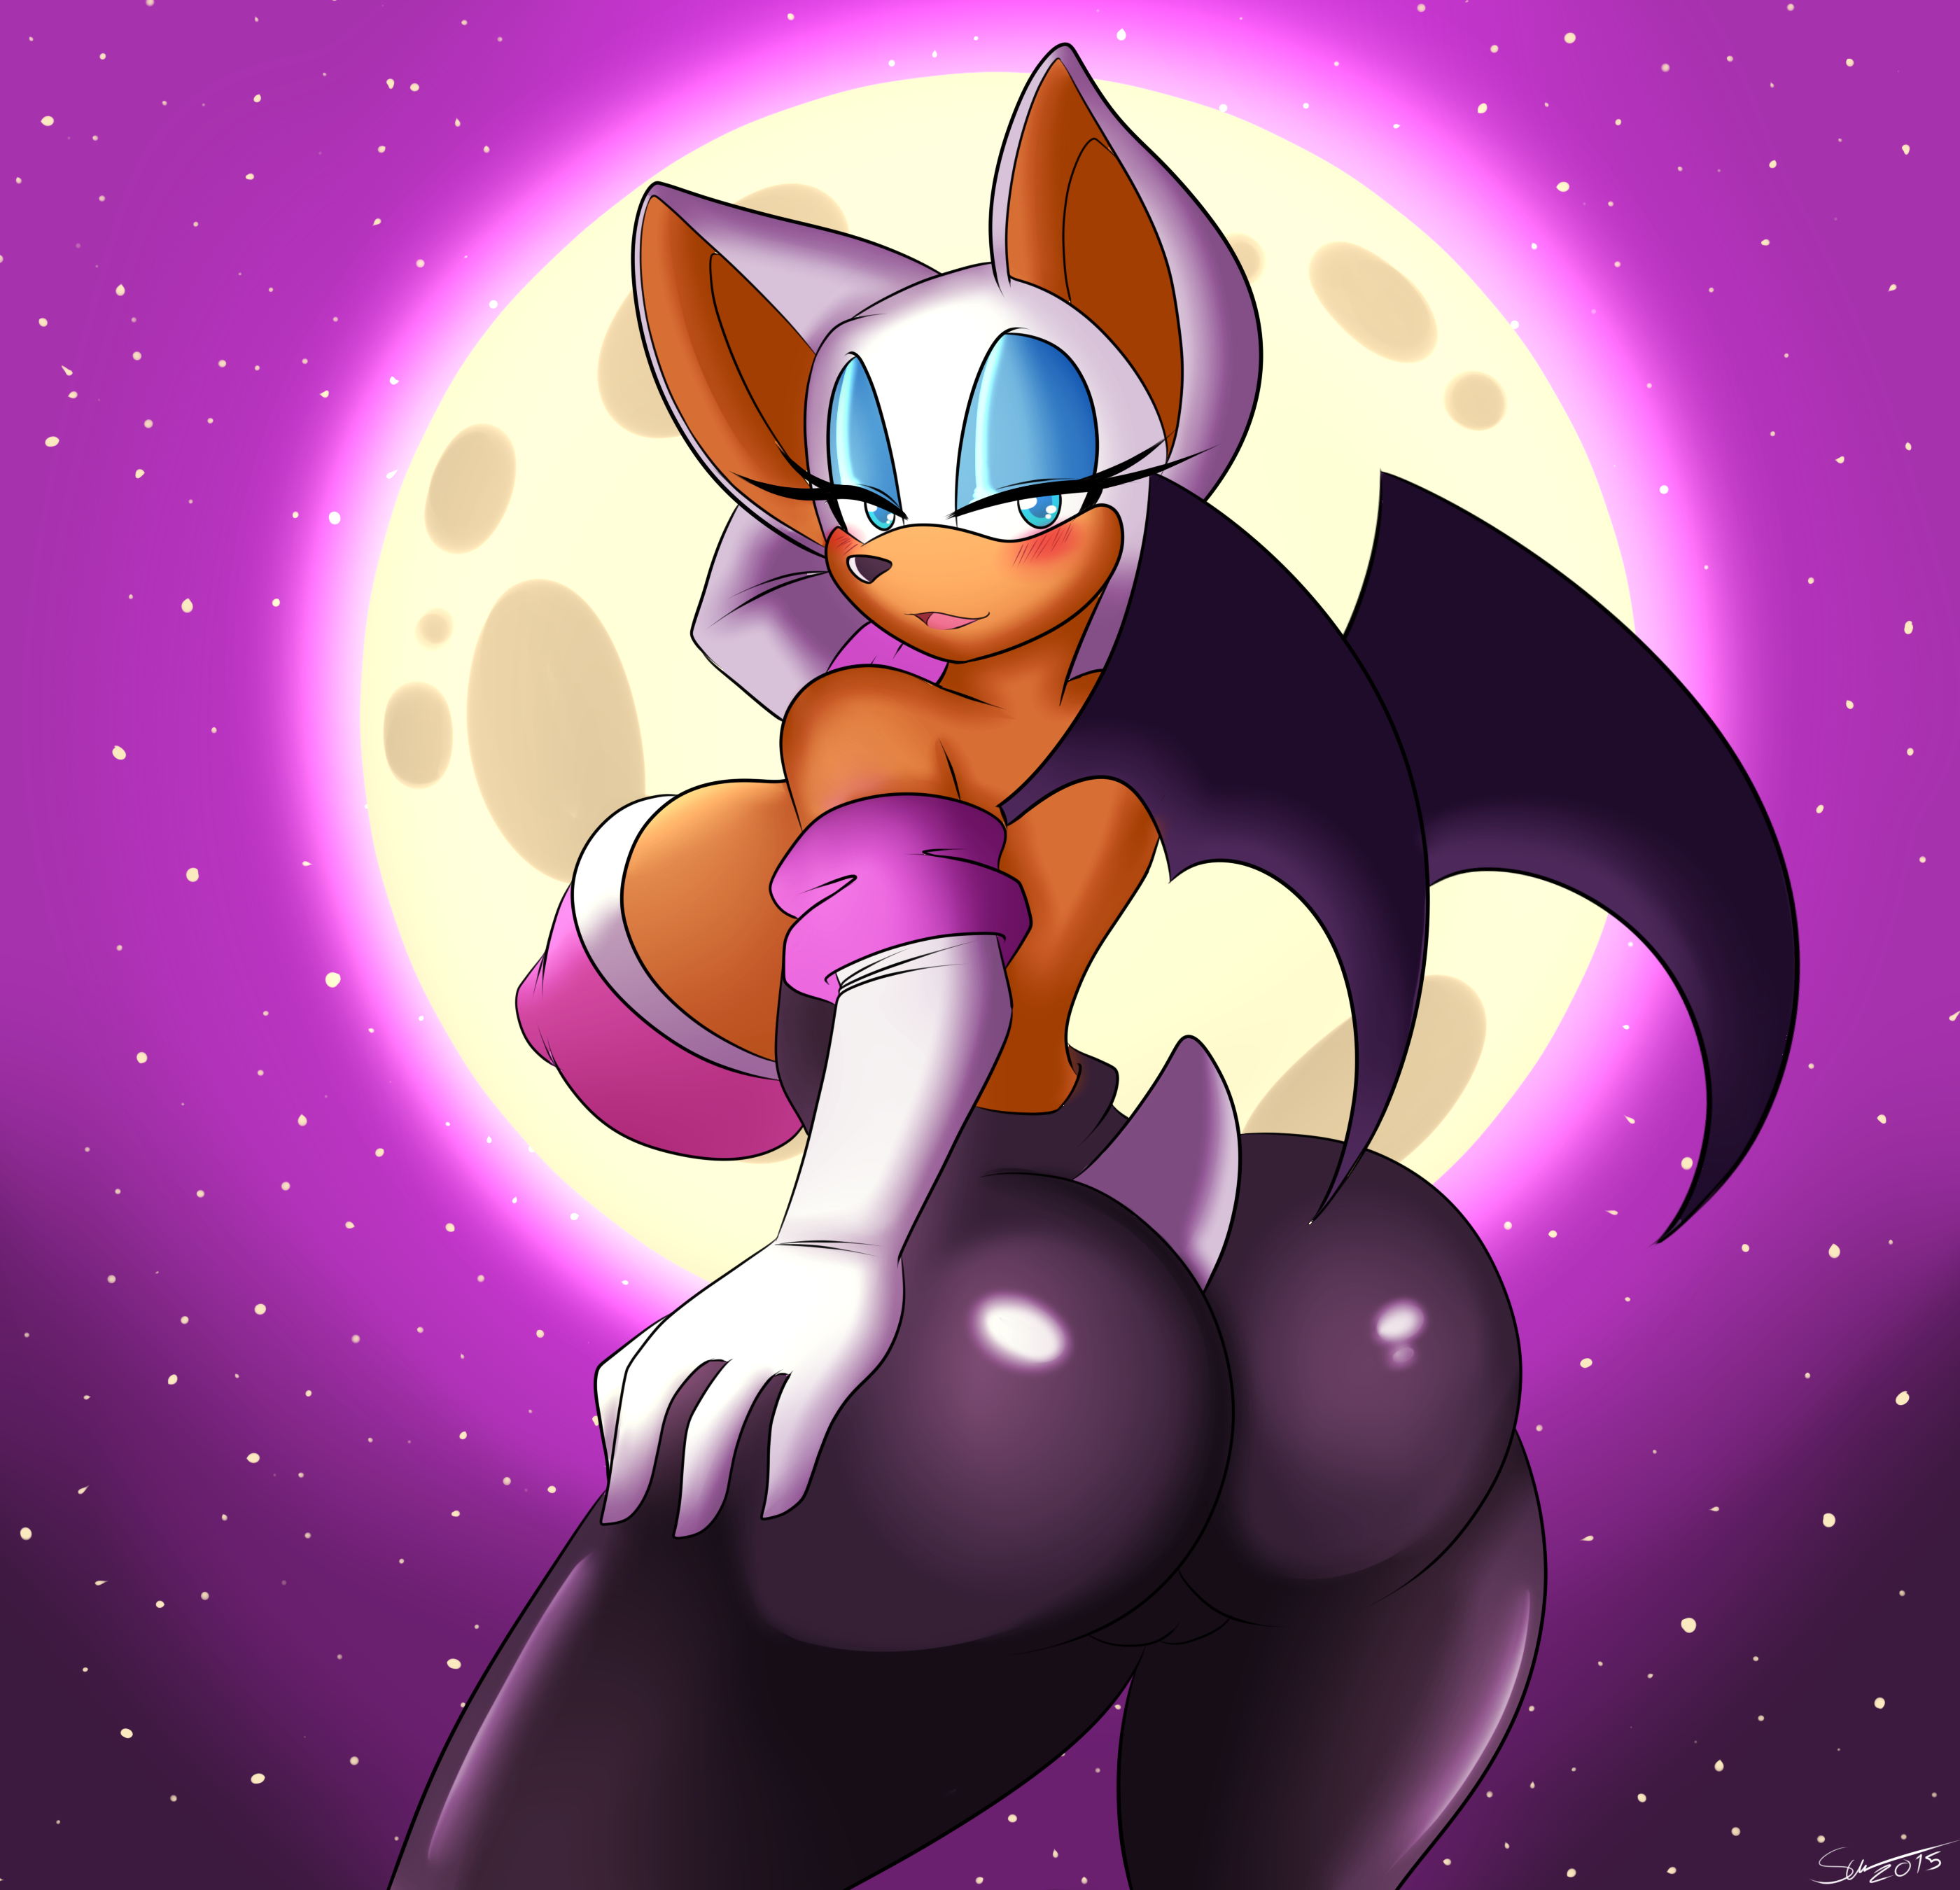 rouge the sexy bat Images on Fanpop.